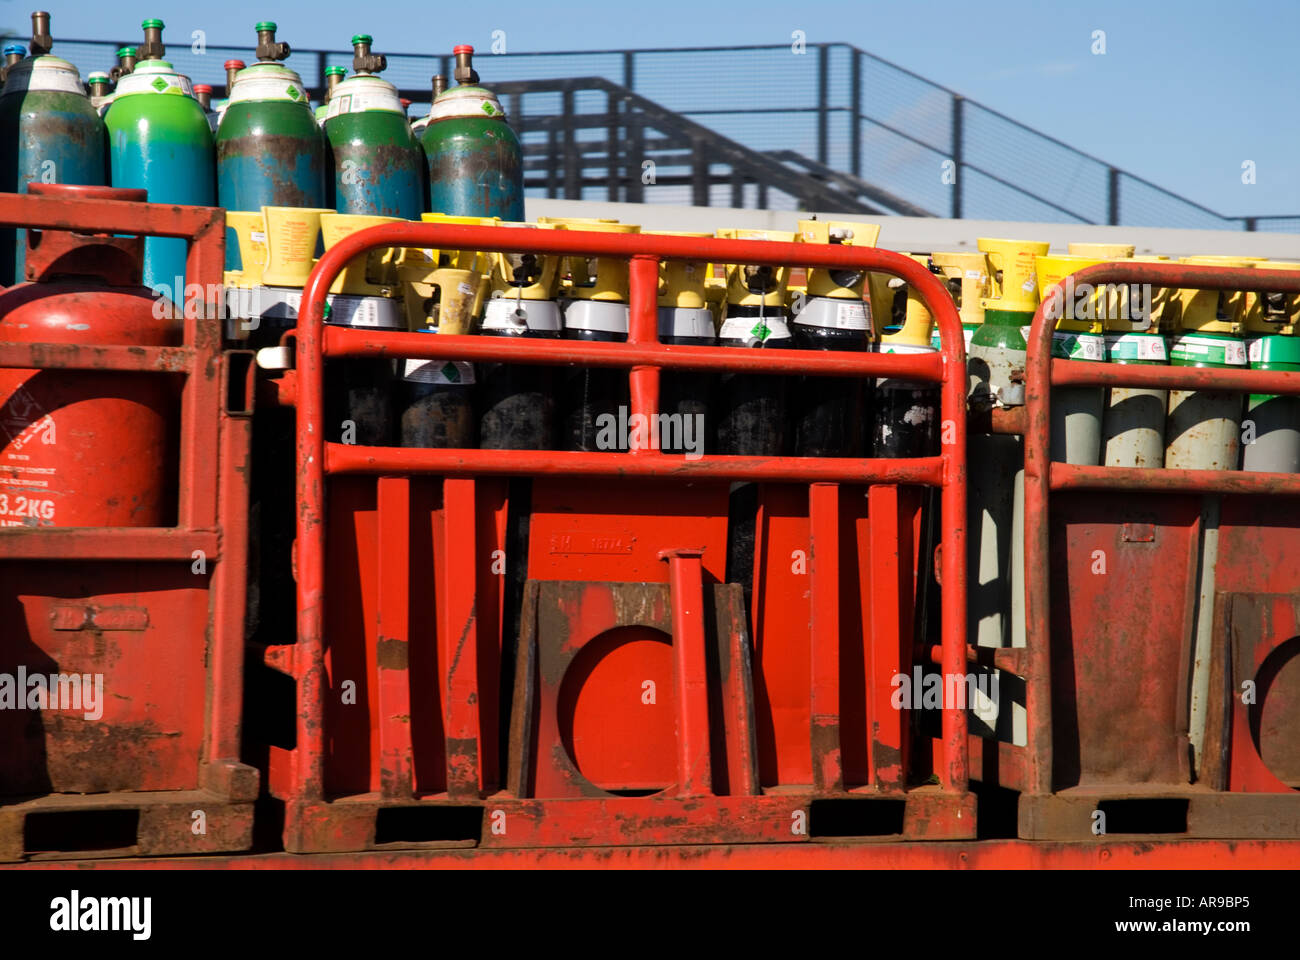 Image of different types of gas bot tles on the back of a lorry Stock Photo  - Alamy